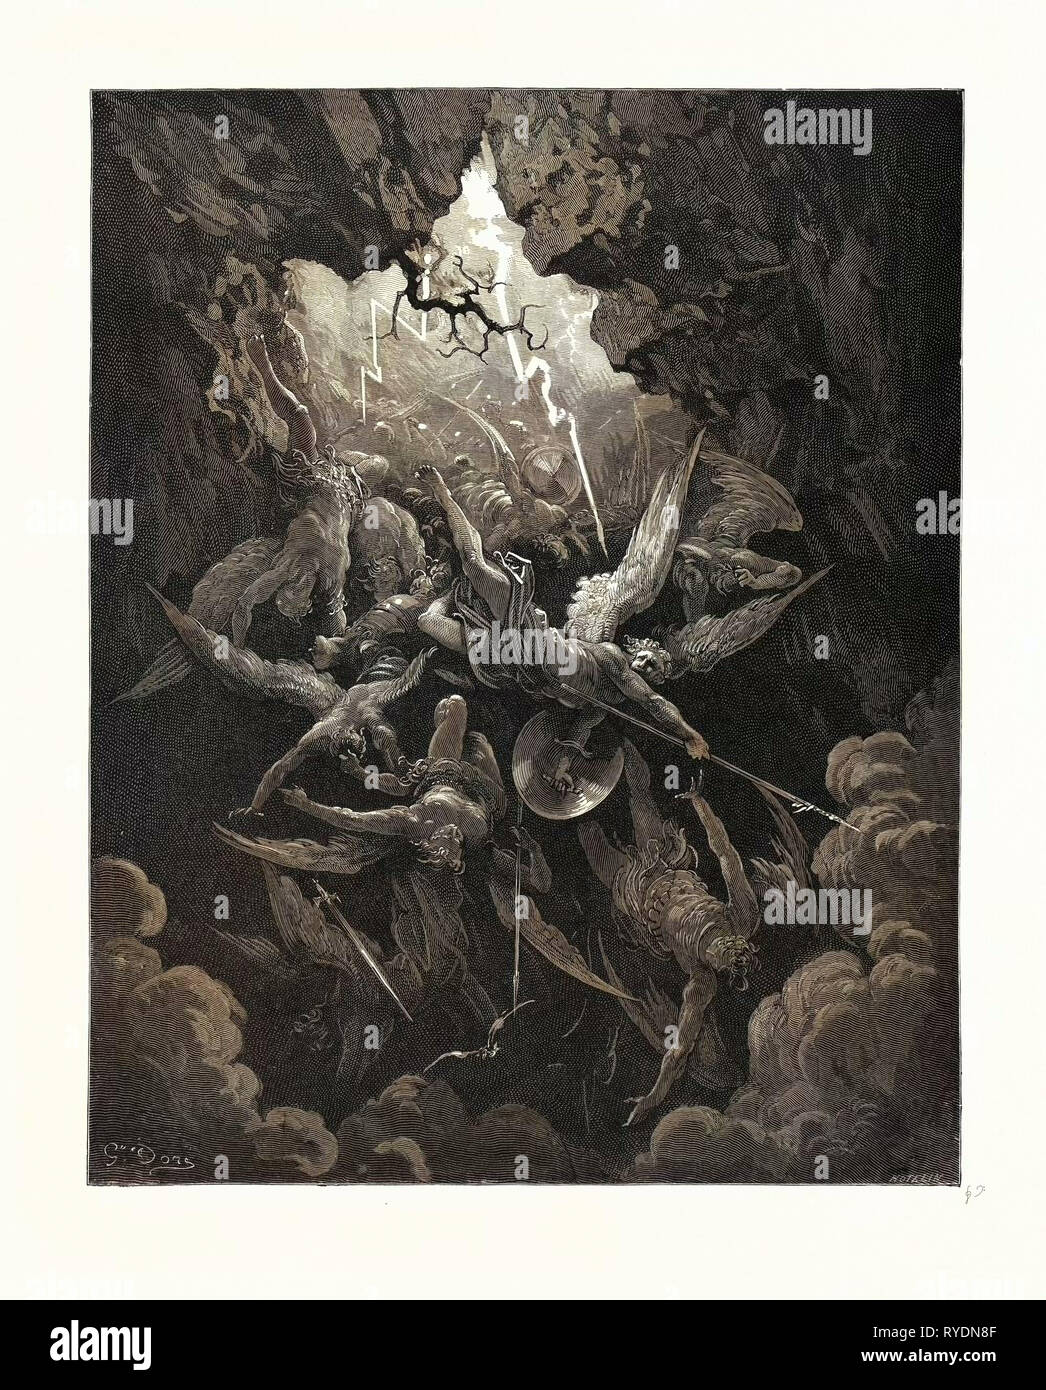 The Mouth of Hell, by Gustave Dore, 1832 - 1883, French. Engraving for Paradise Lost by Milton. 1870, Art, Artist, Romanticism, Colour, Color Engraving Stock Photo